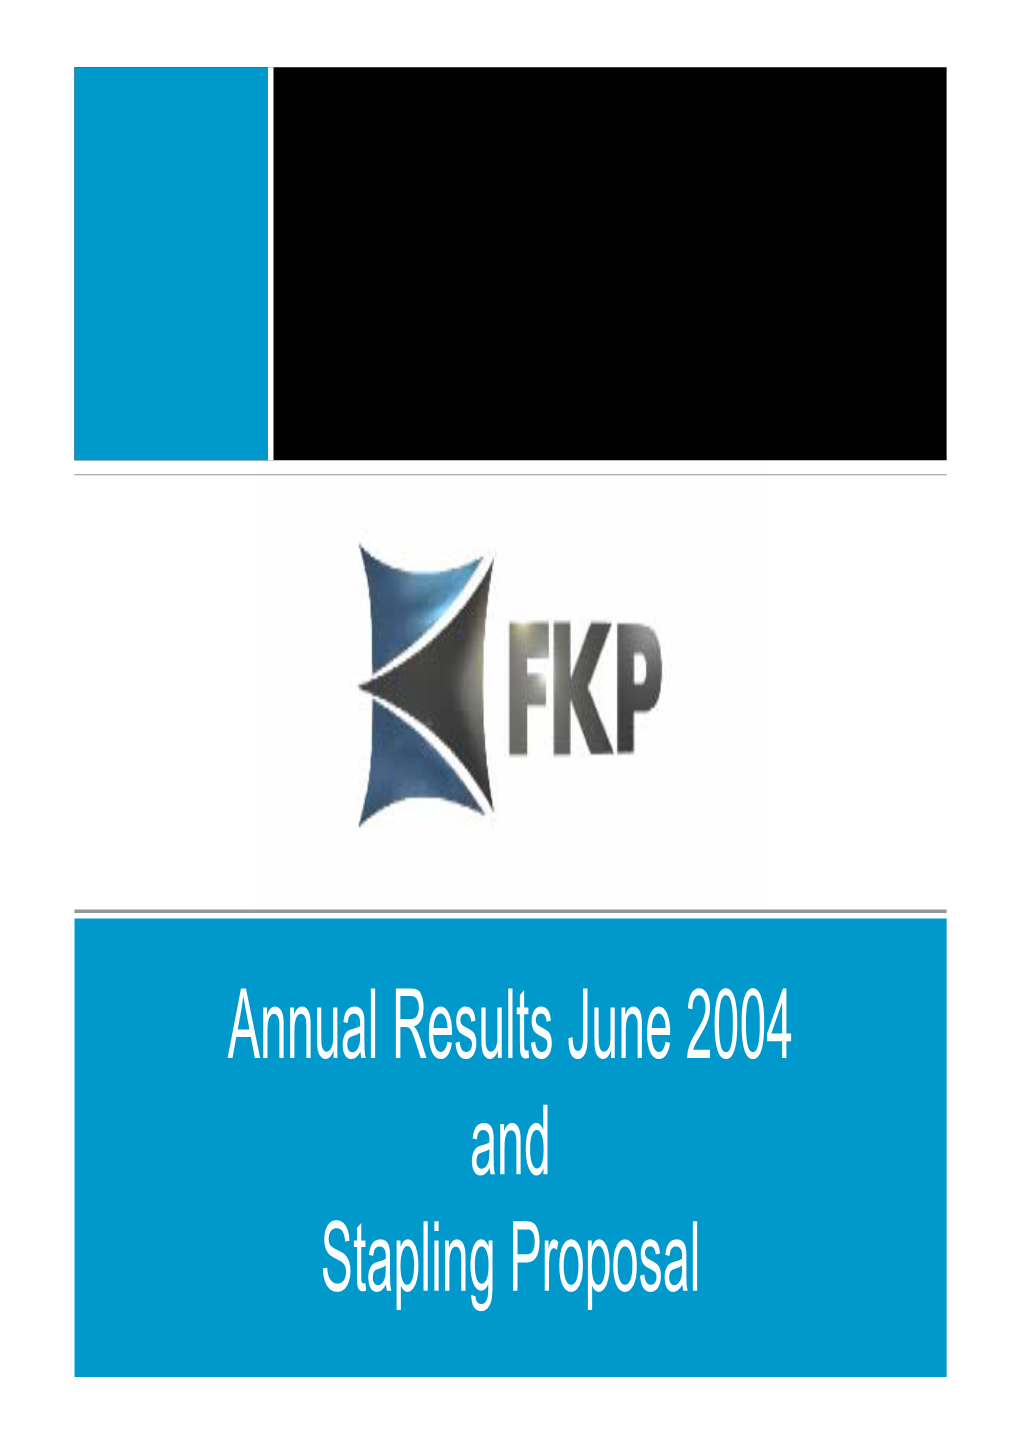 Annual Results & Stapling Proposal Presentation